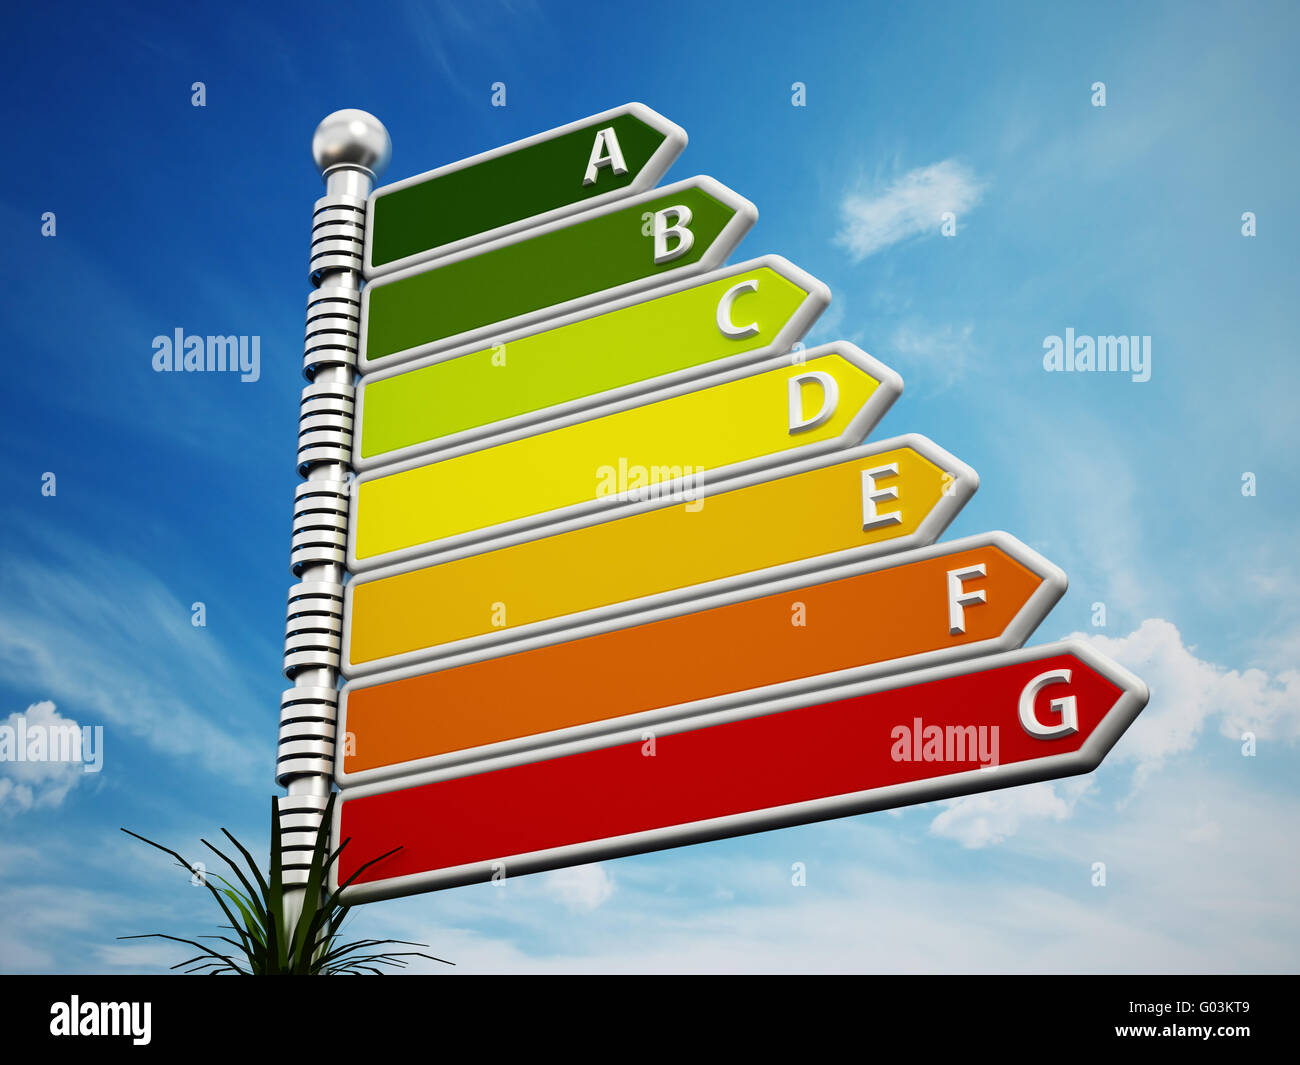 Energy efficiency chart similar to direction signs on sky background. Stock Photo